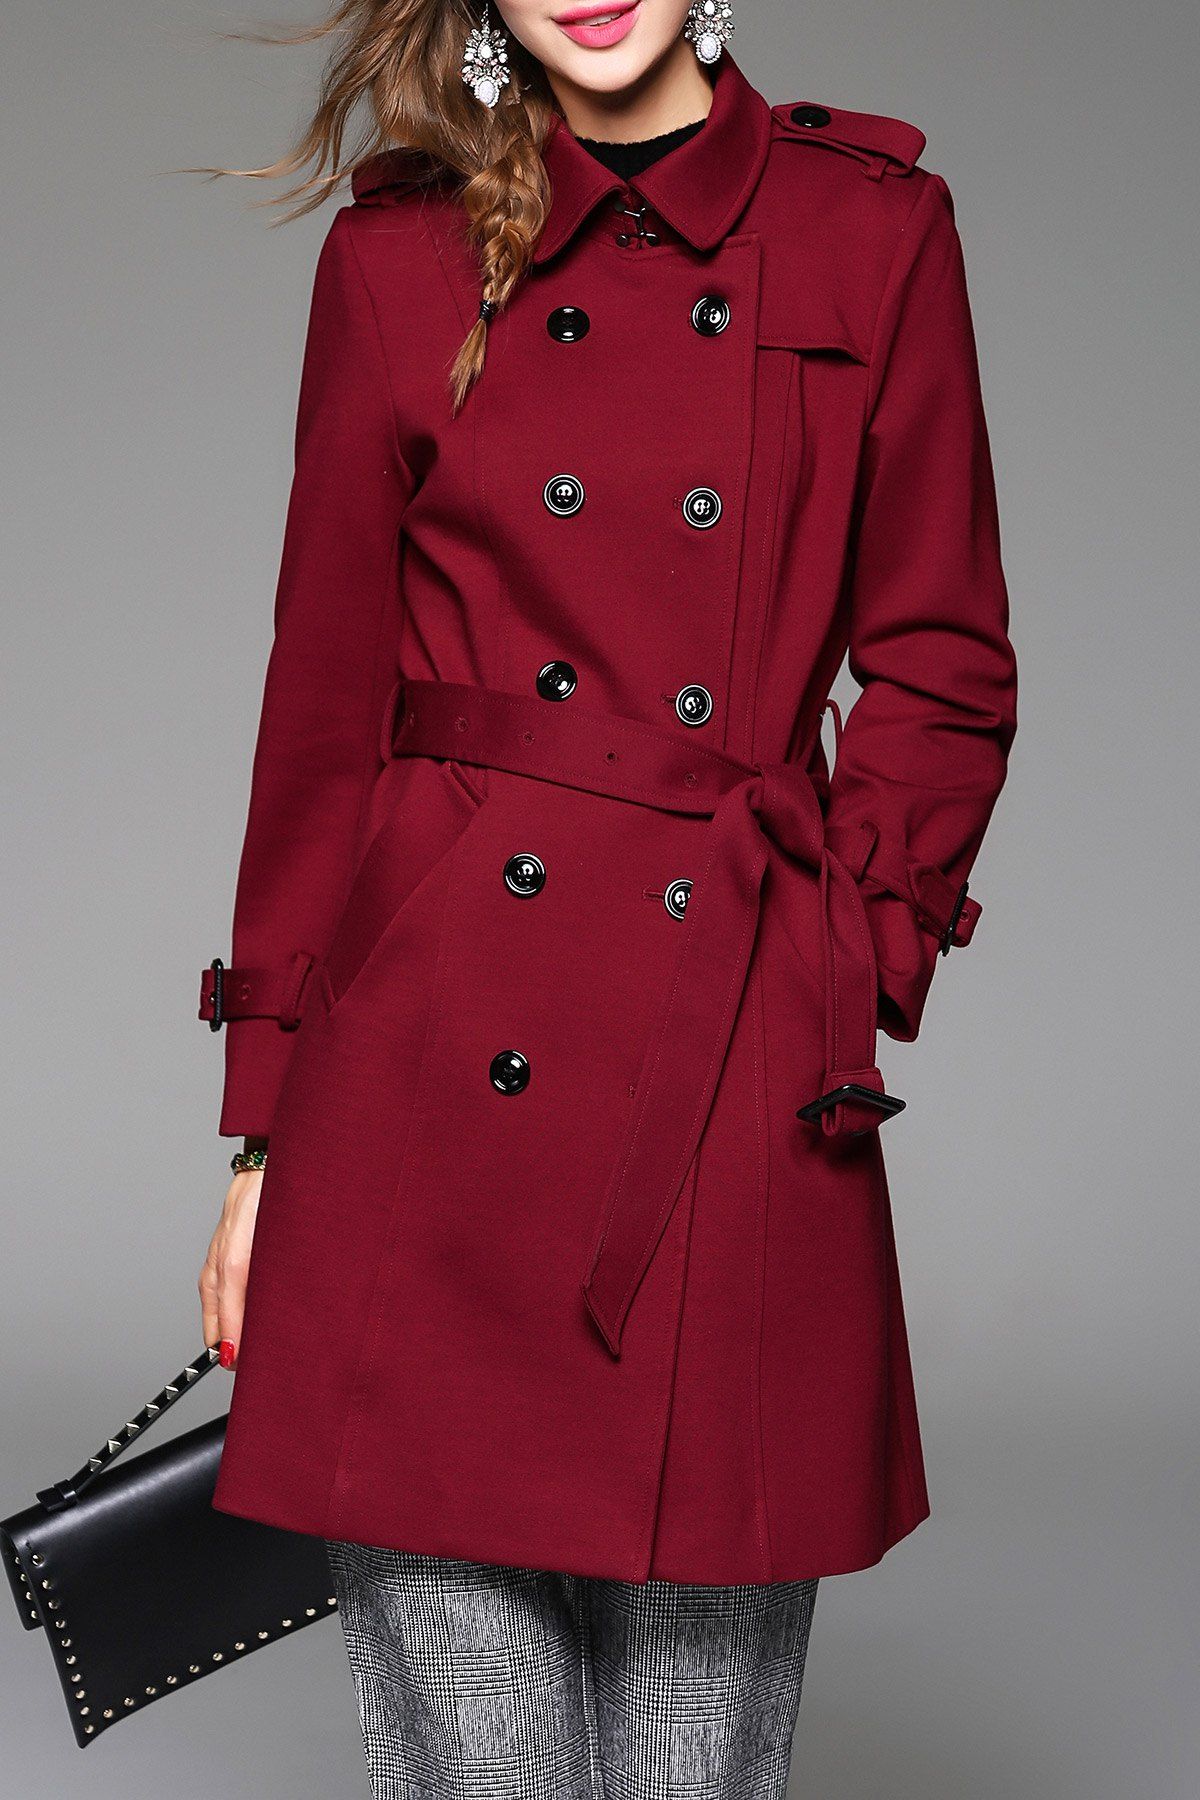 [29% OFF] 2021 Button Up Trench Coat With Belt In WINE RED | DressLily